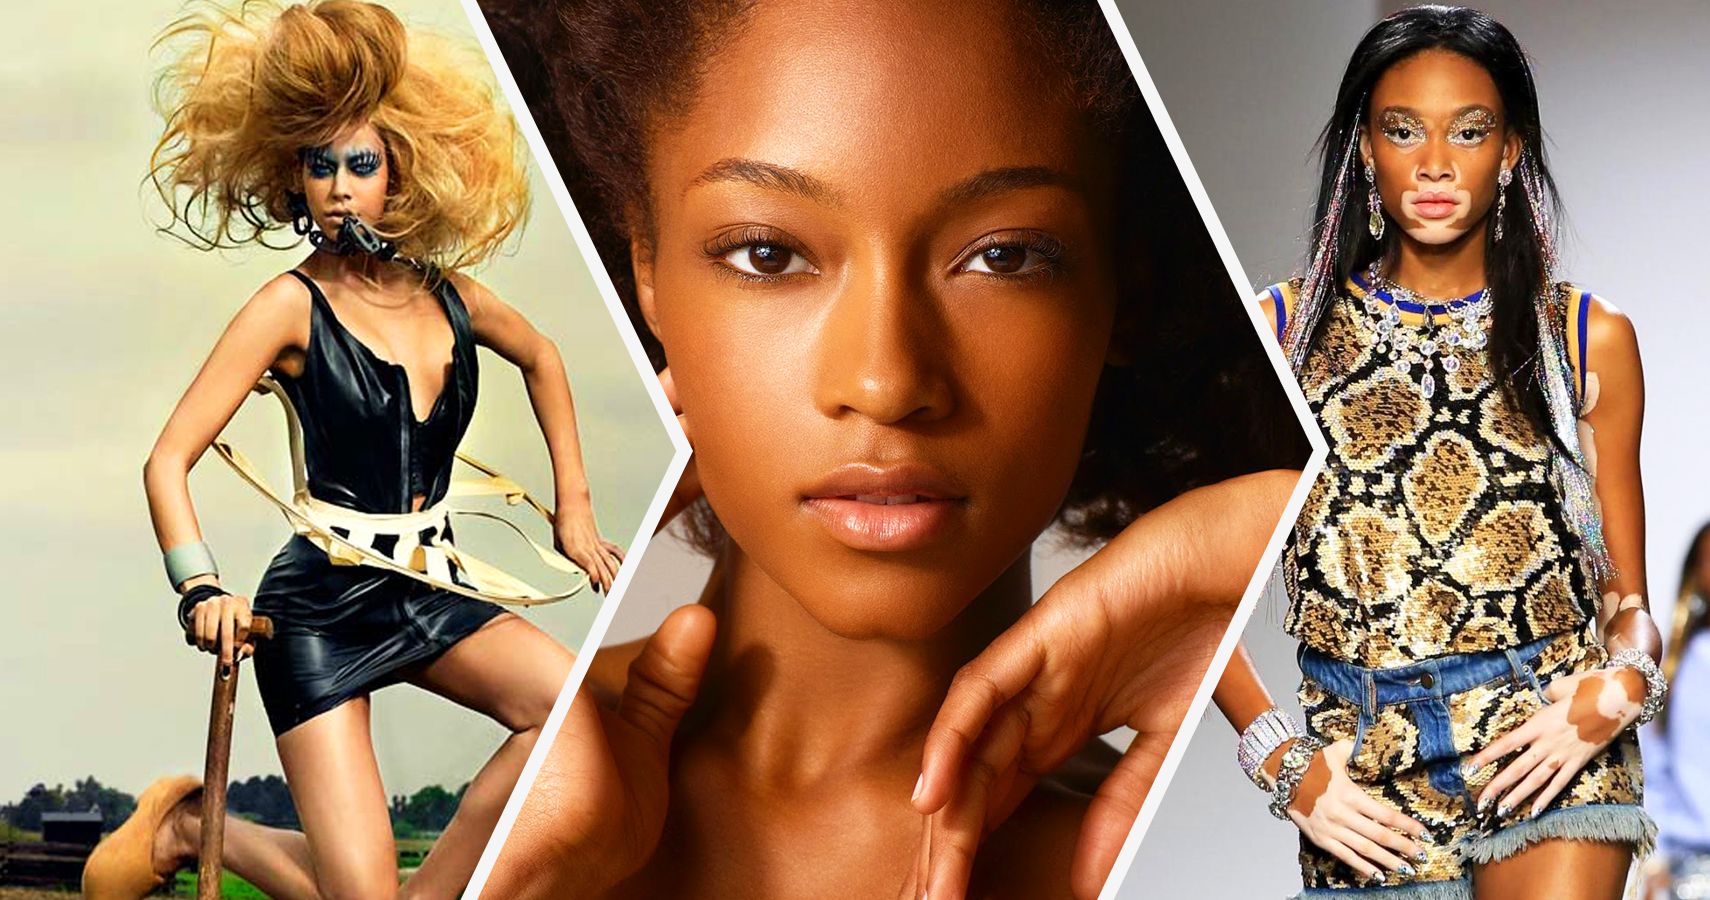 Americas Next Top Model 9 Stars Who Became AListers (And 7 Who Flopped)